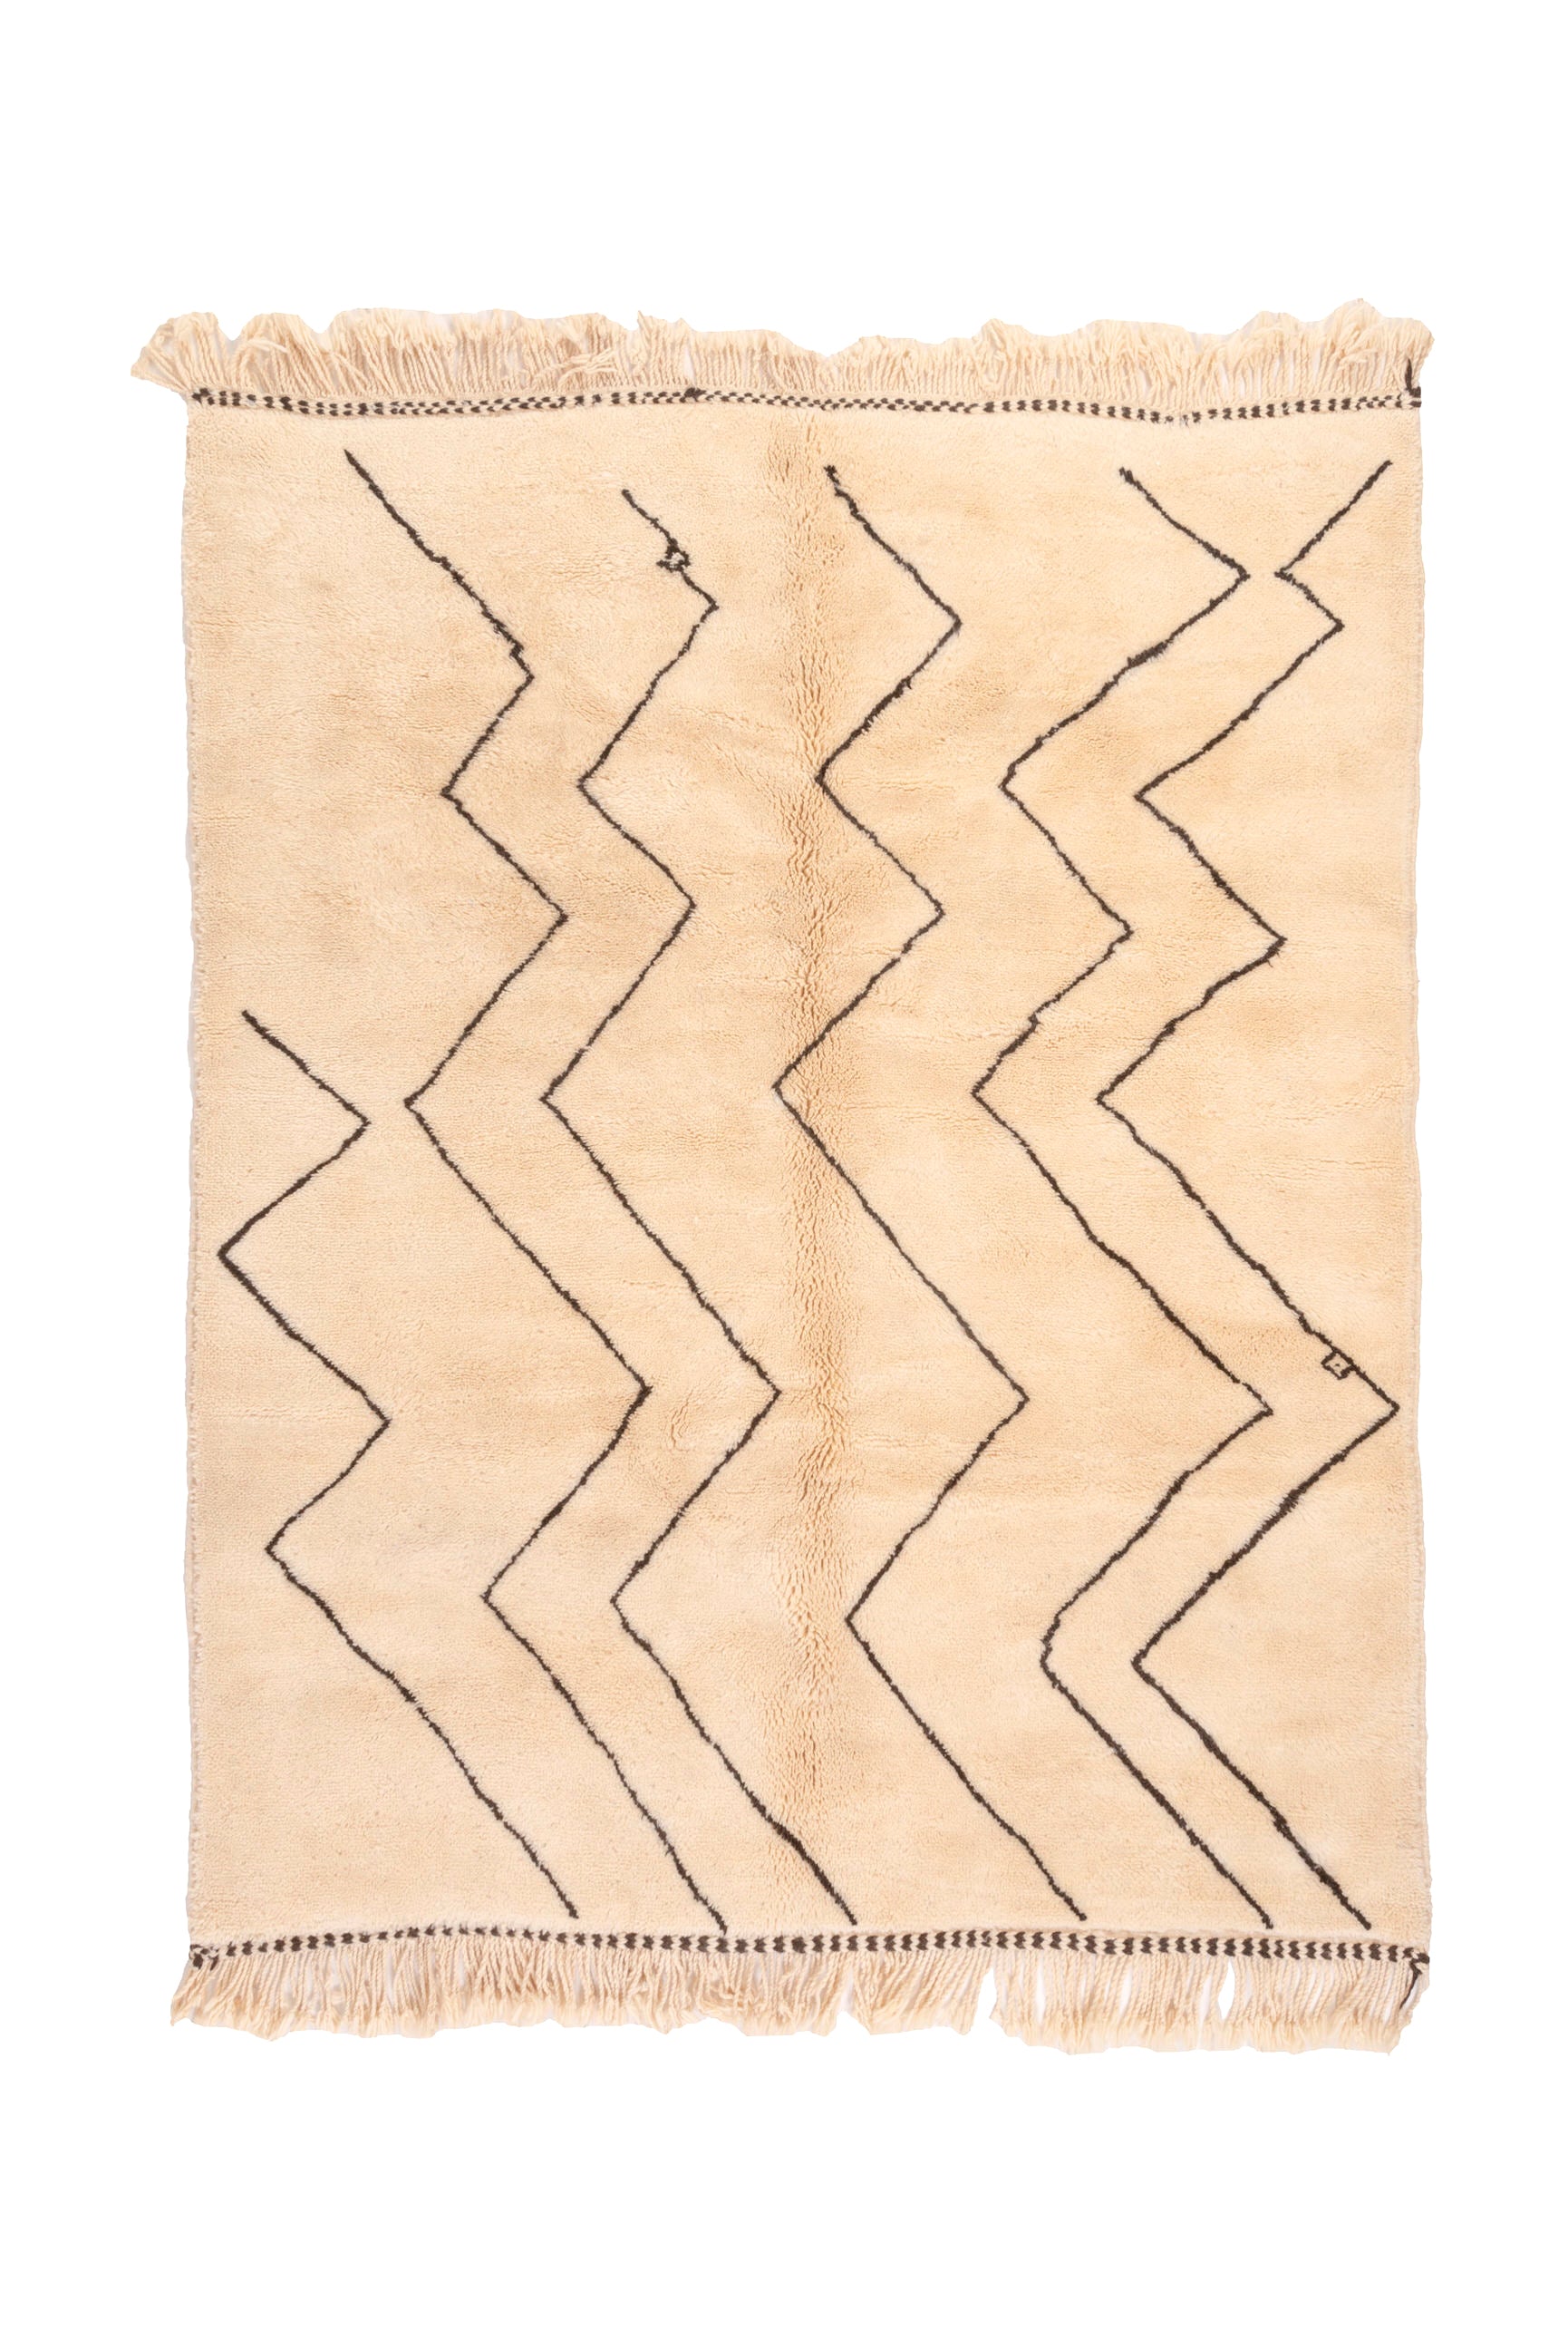 Elevate your home with 'Ivory Zigzag Delight Rug.' It effortlessly combines classic charm and contemporary style. Customize it to match your style and space. Make your decor uniquely yours.